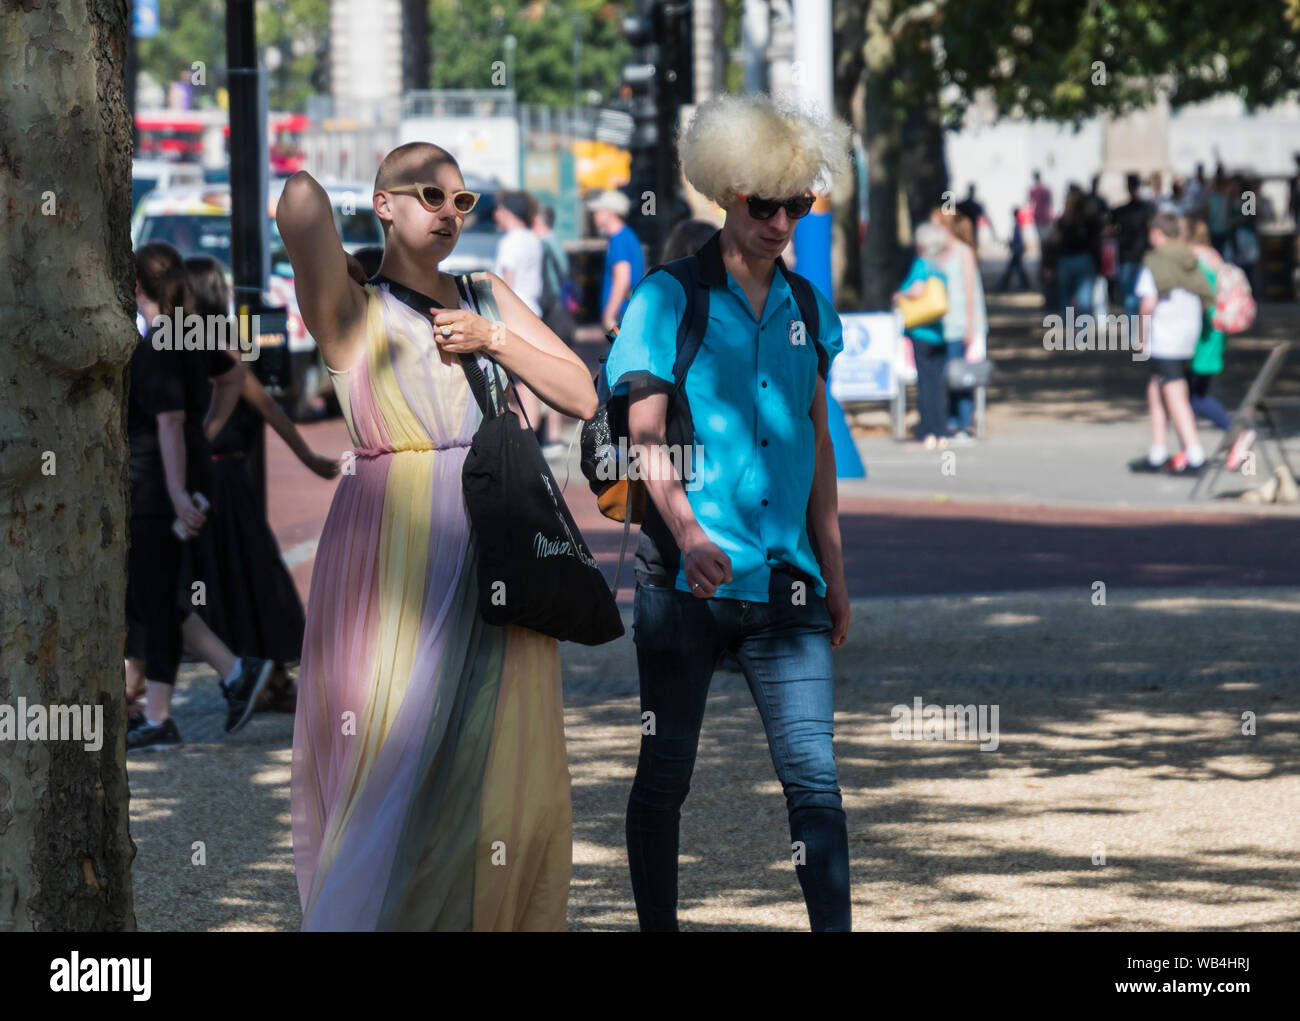 Young male & female couple of people dressed in a unique modern style in Central London, England, UK. Modern lifestyle. Looking different. Unique look. Stock Photo